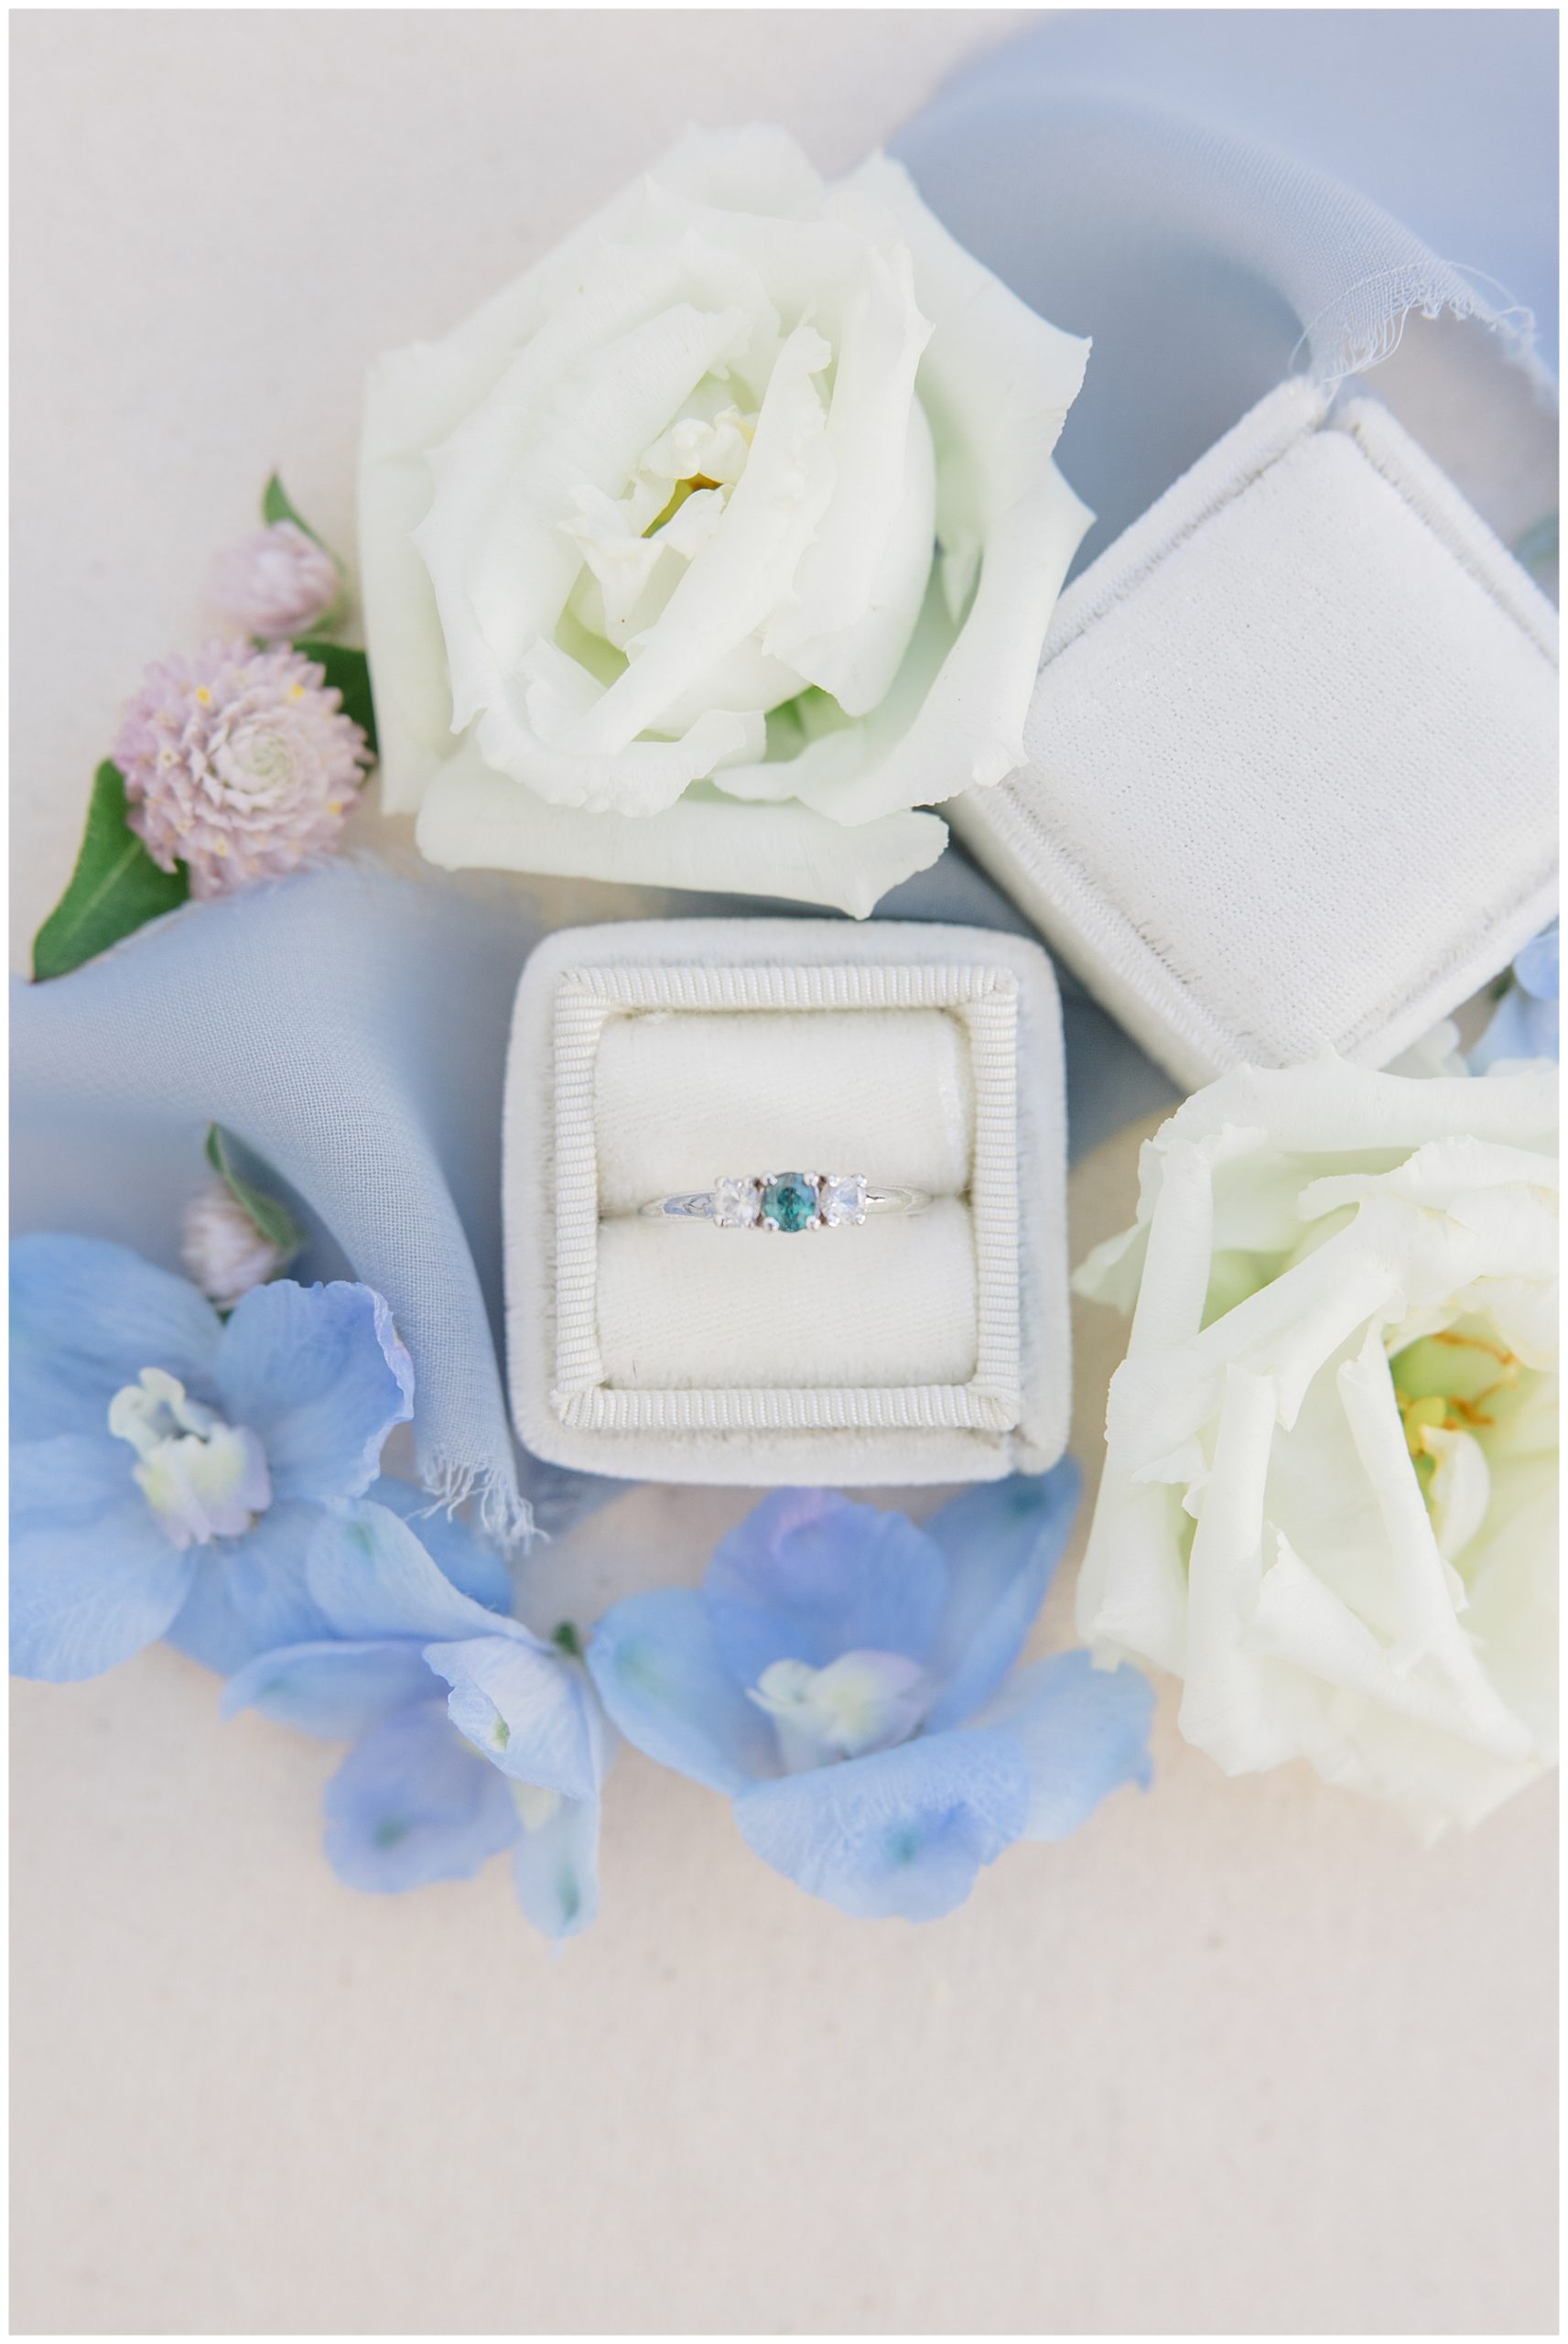 rings in ring box surrounded by wedding flowers